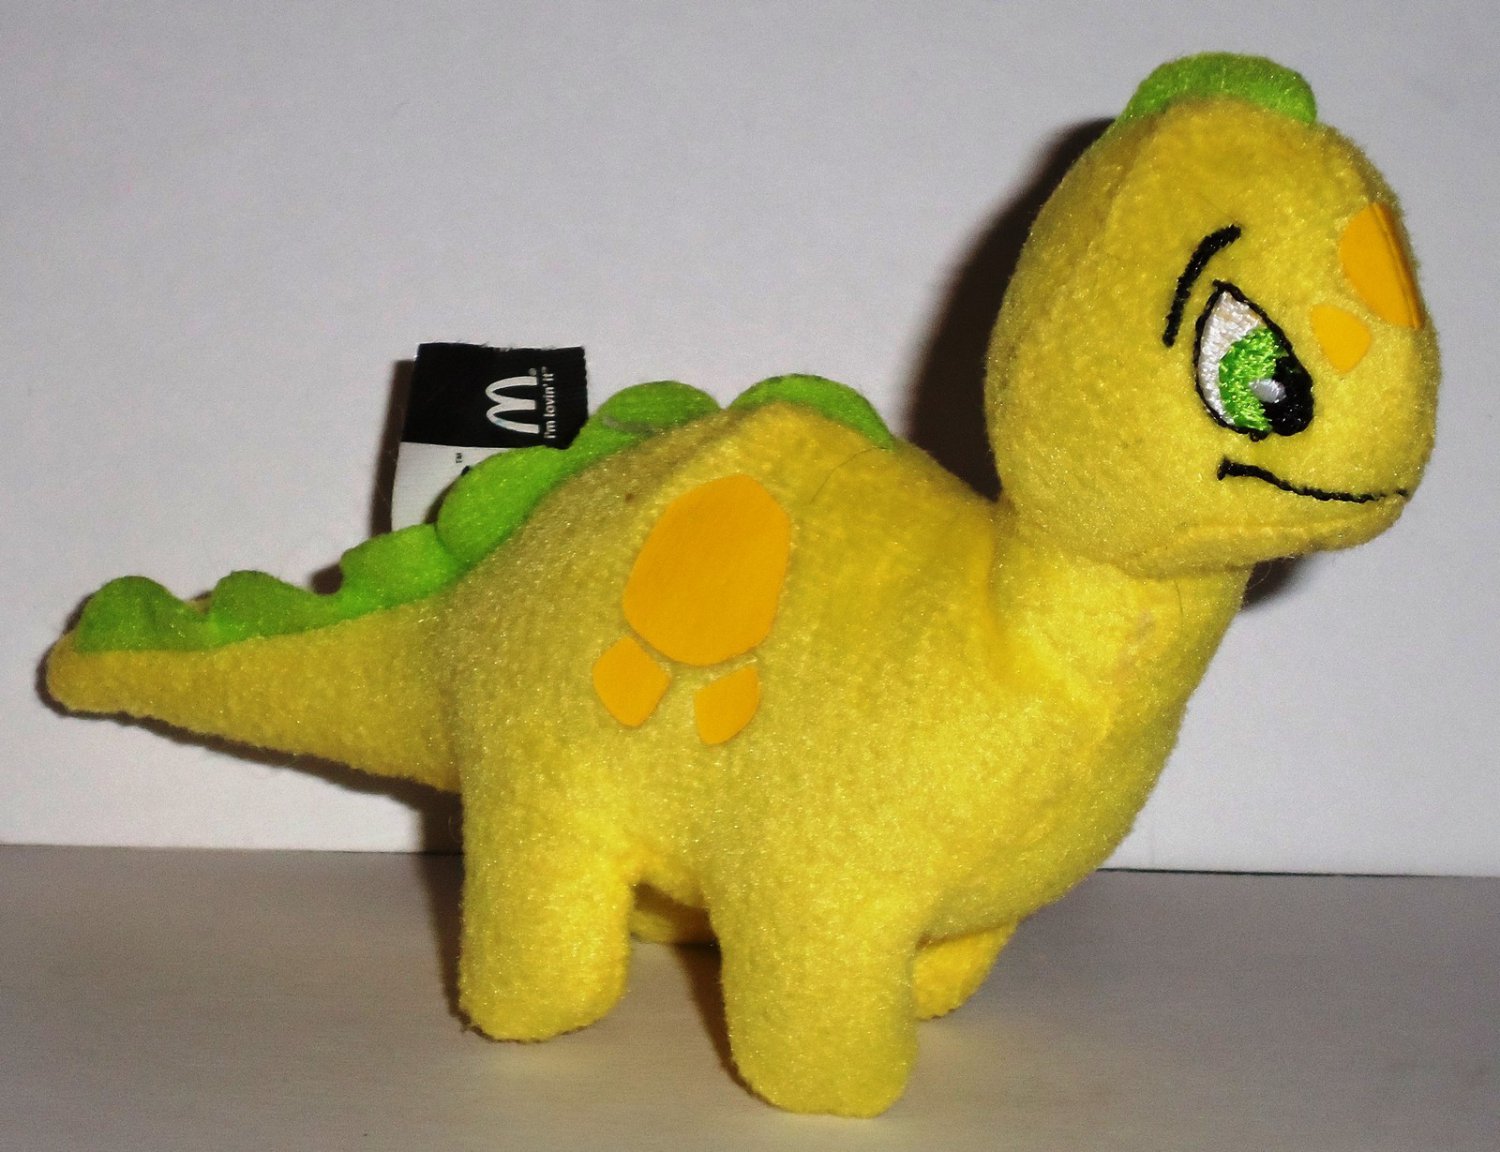 LOOSE NO TAG McDonald's 2004 Neopets YURBLE Sml Plush Neopet CHOOSE COLOR White 